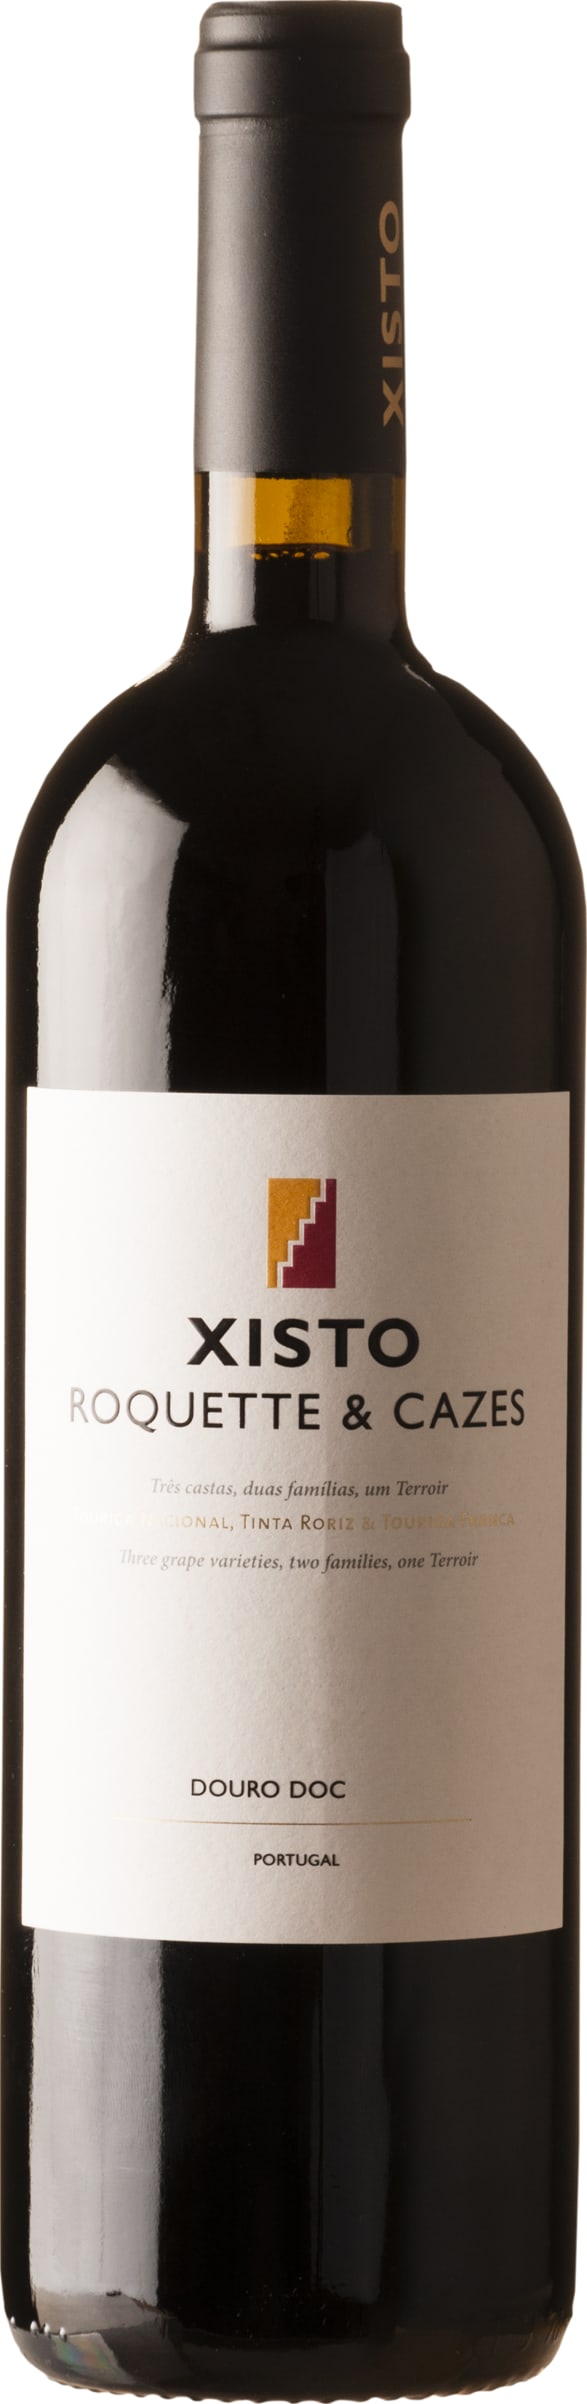 Roquette and Cazes Xisto 2018 75cl - Buy Roquette and Cazes Wines from GREAT WINES DIRECT wine shop